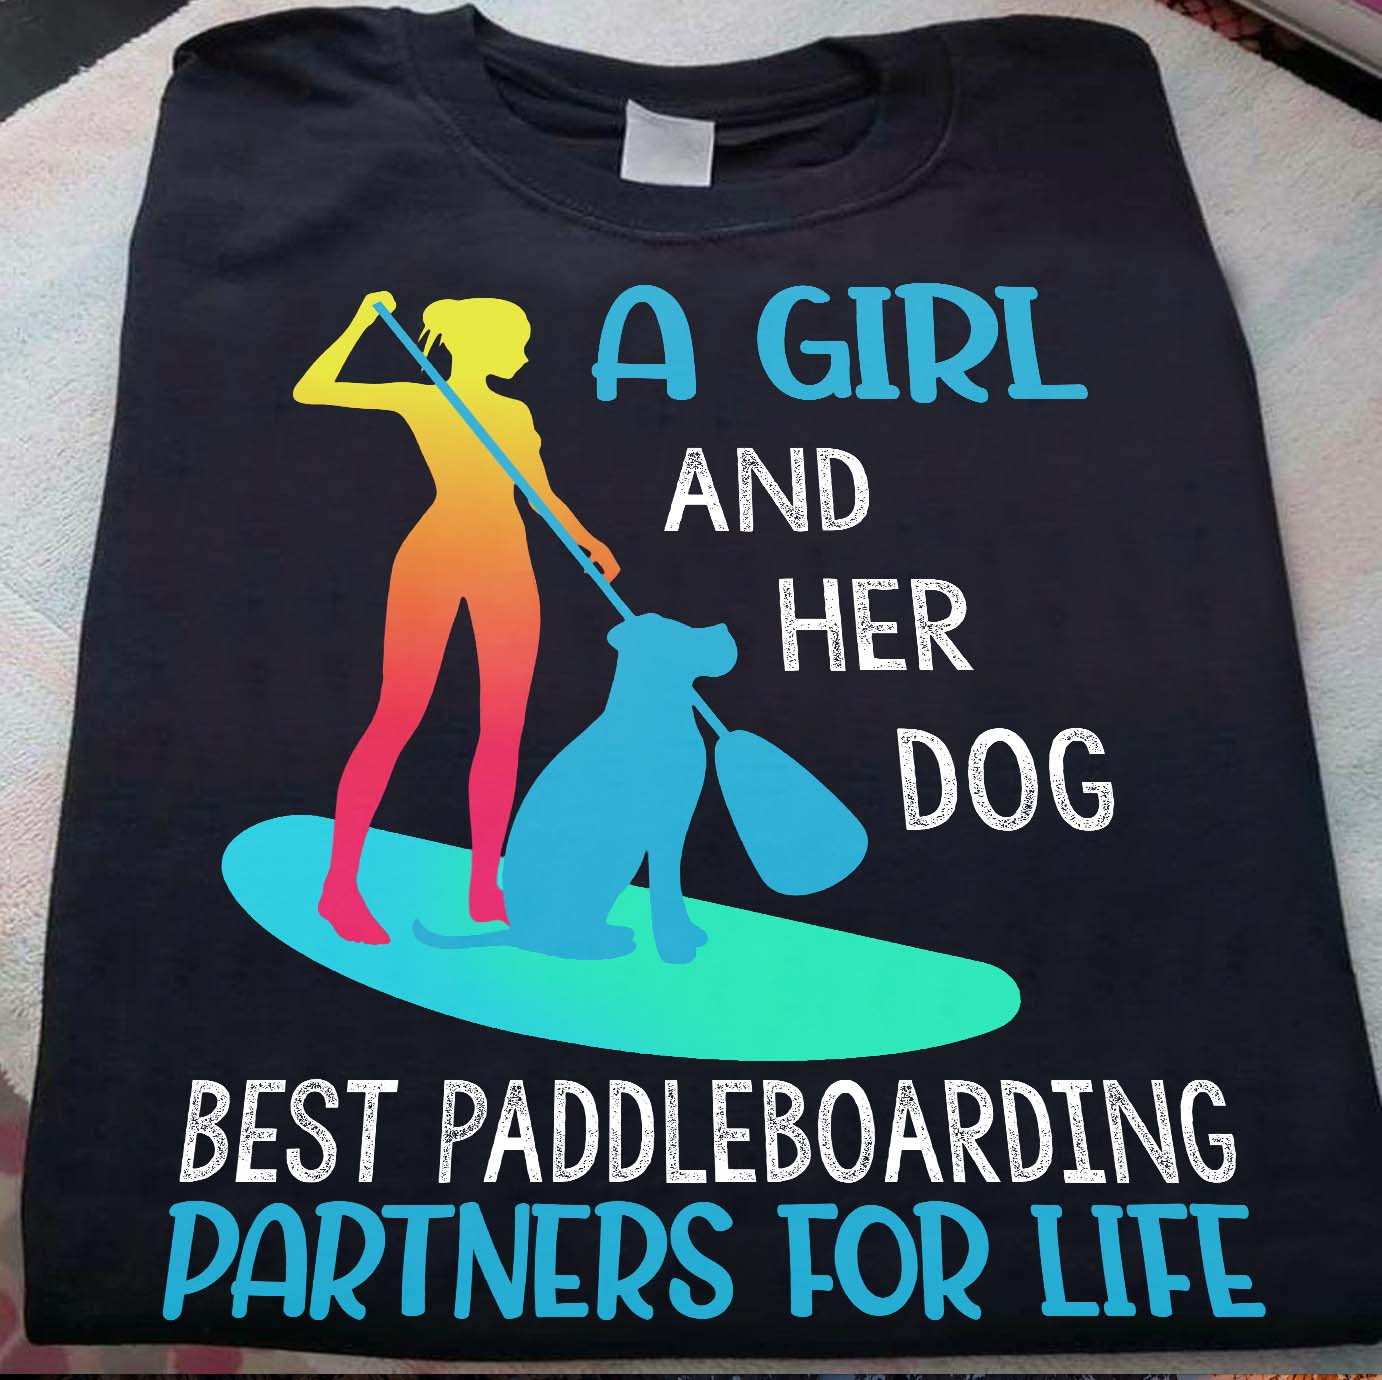 A girl and her dog best paddleboarding partners for life - Girl and dog